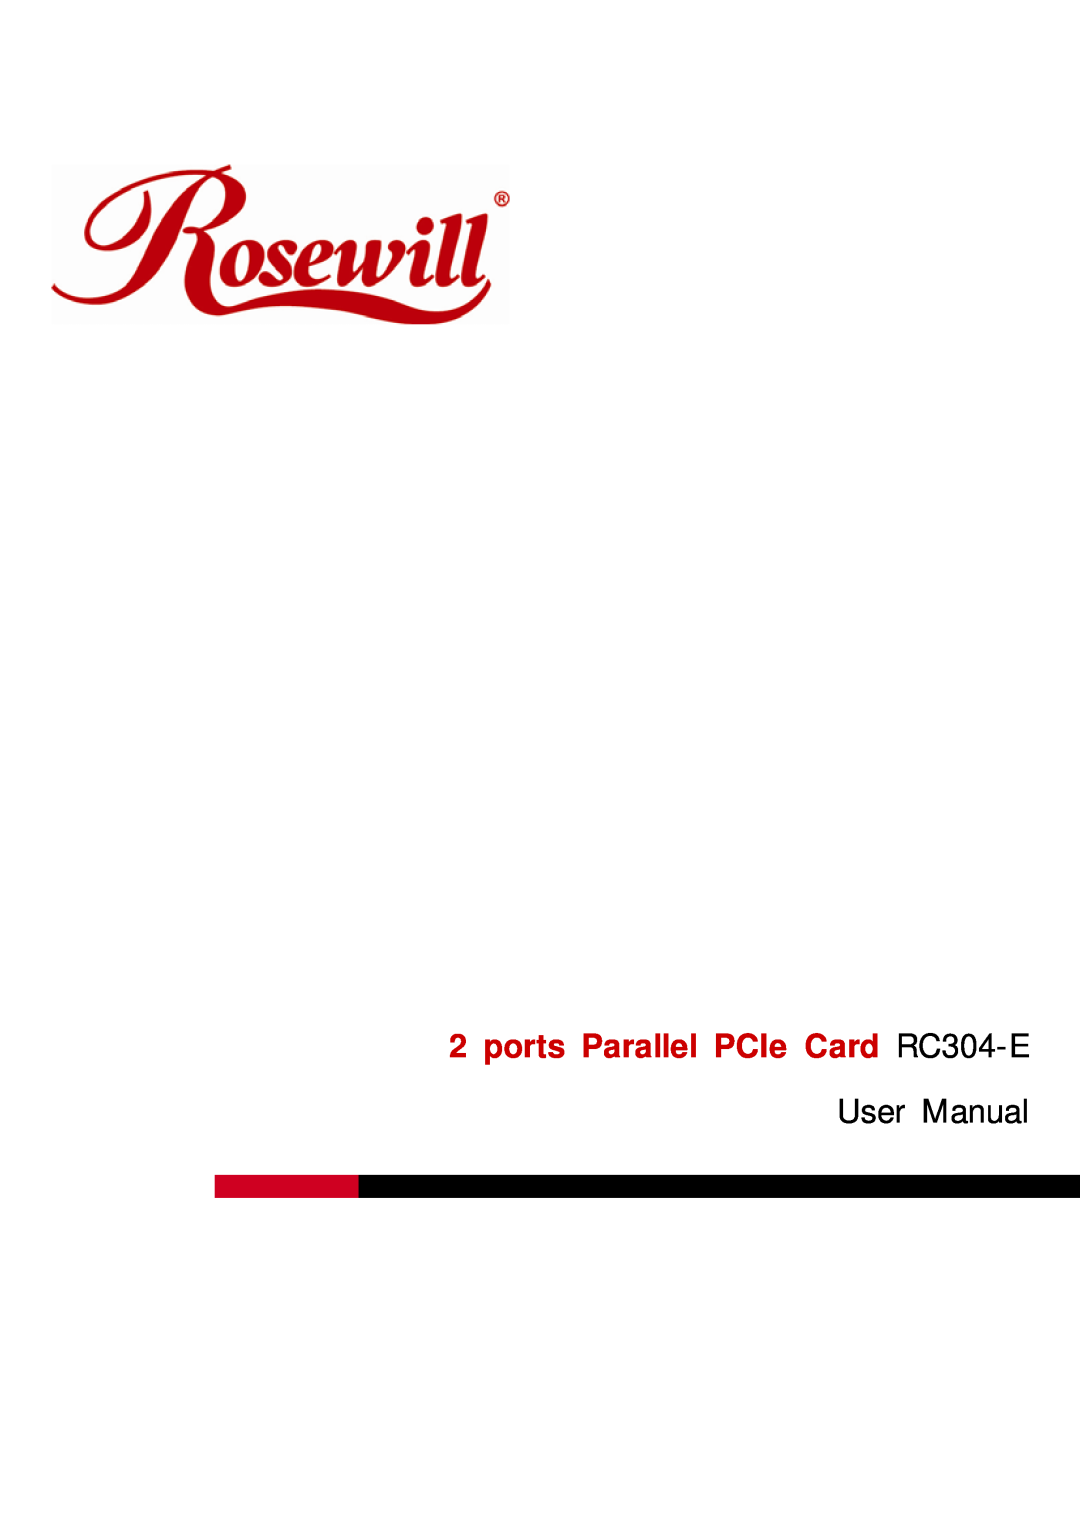 Rosewill user manual ports Parallel PCIe Card RC304-E User Manual 